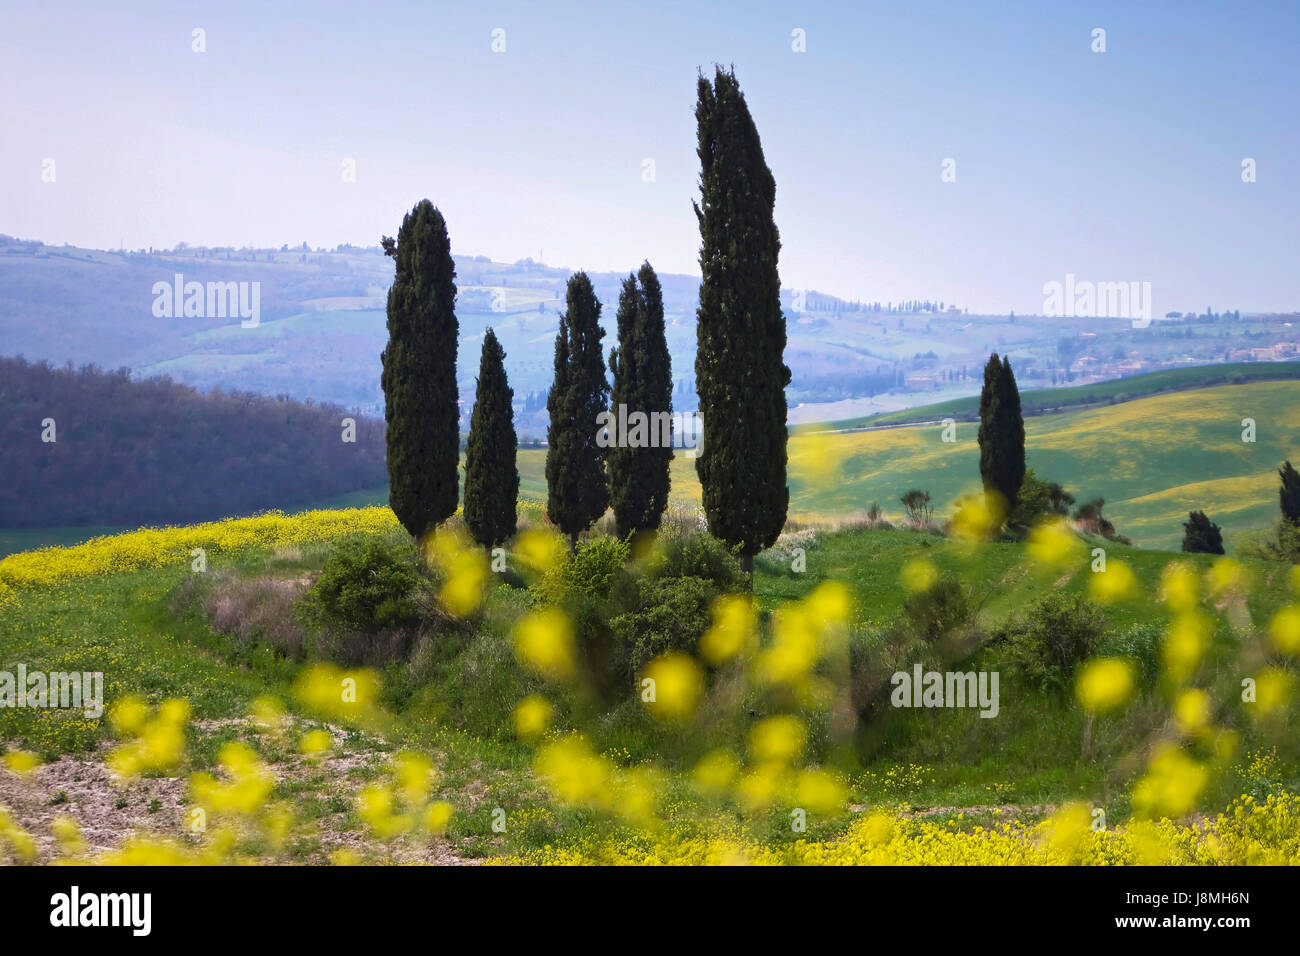 Pine tree in San Quirico d'Orcia in Tuscany. Stock Photo